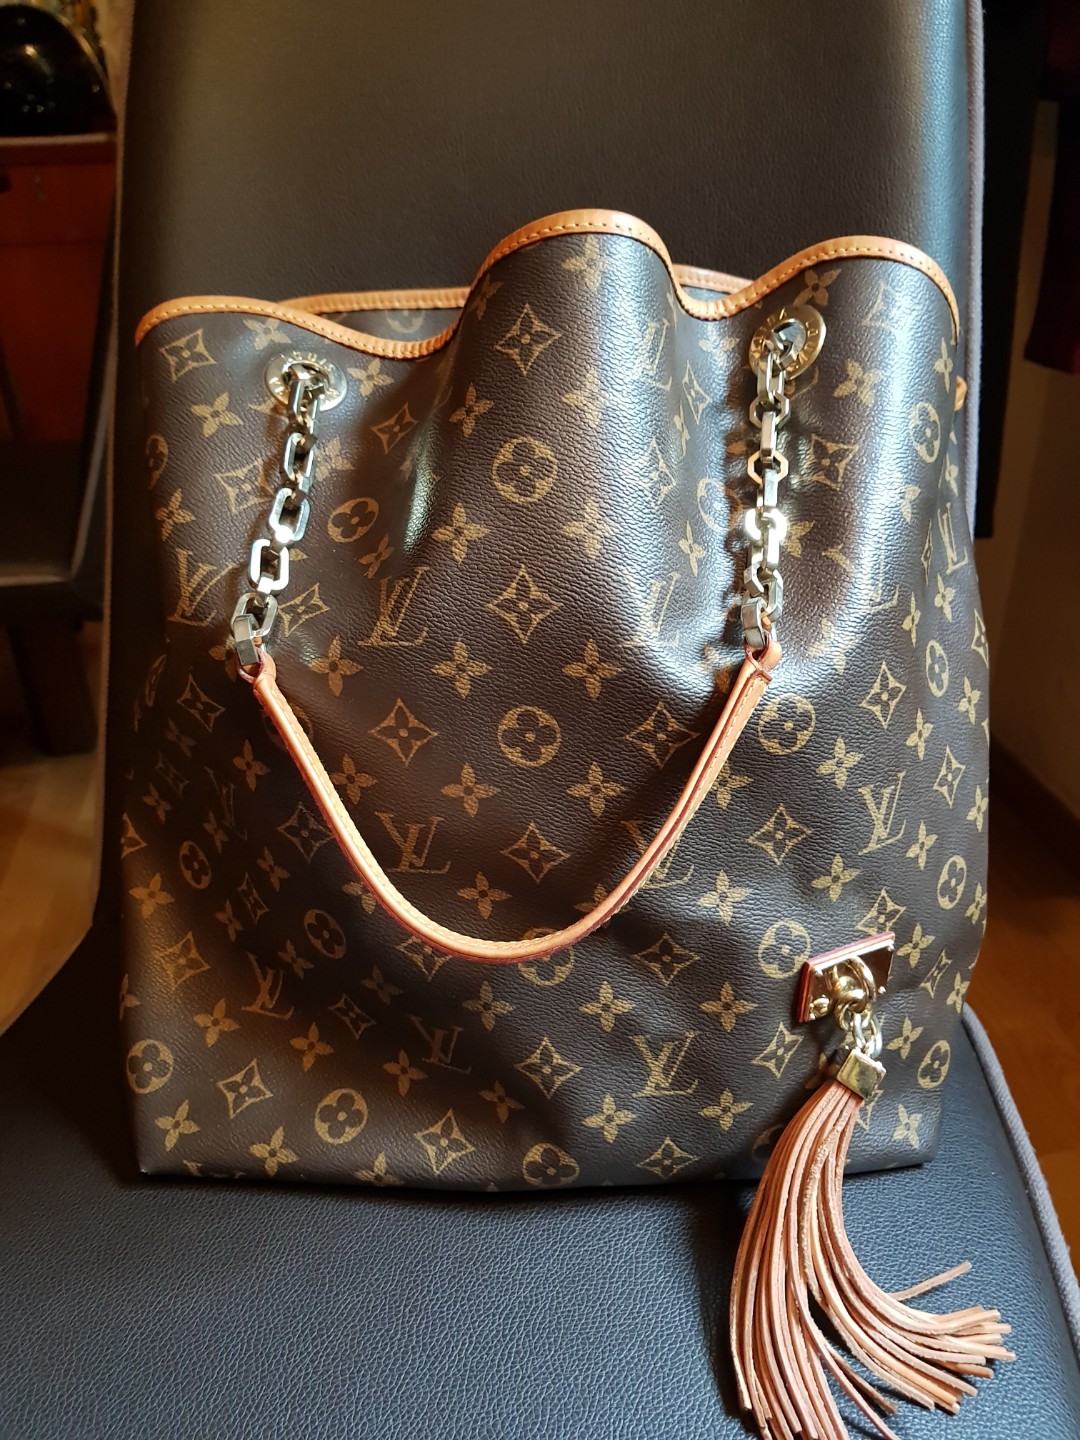 Lv Automne Hiver 2008 monogram Genuine leather, Women's Fashion, Bags &  Wallets, Purses & Pouches on Carousell